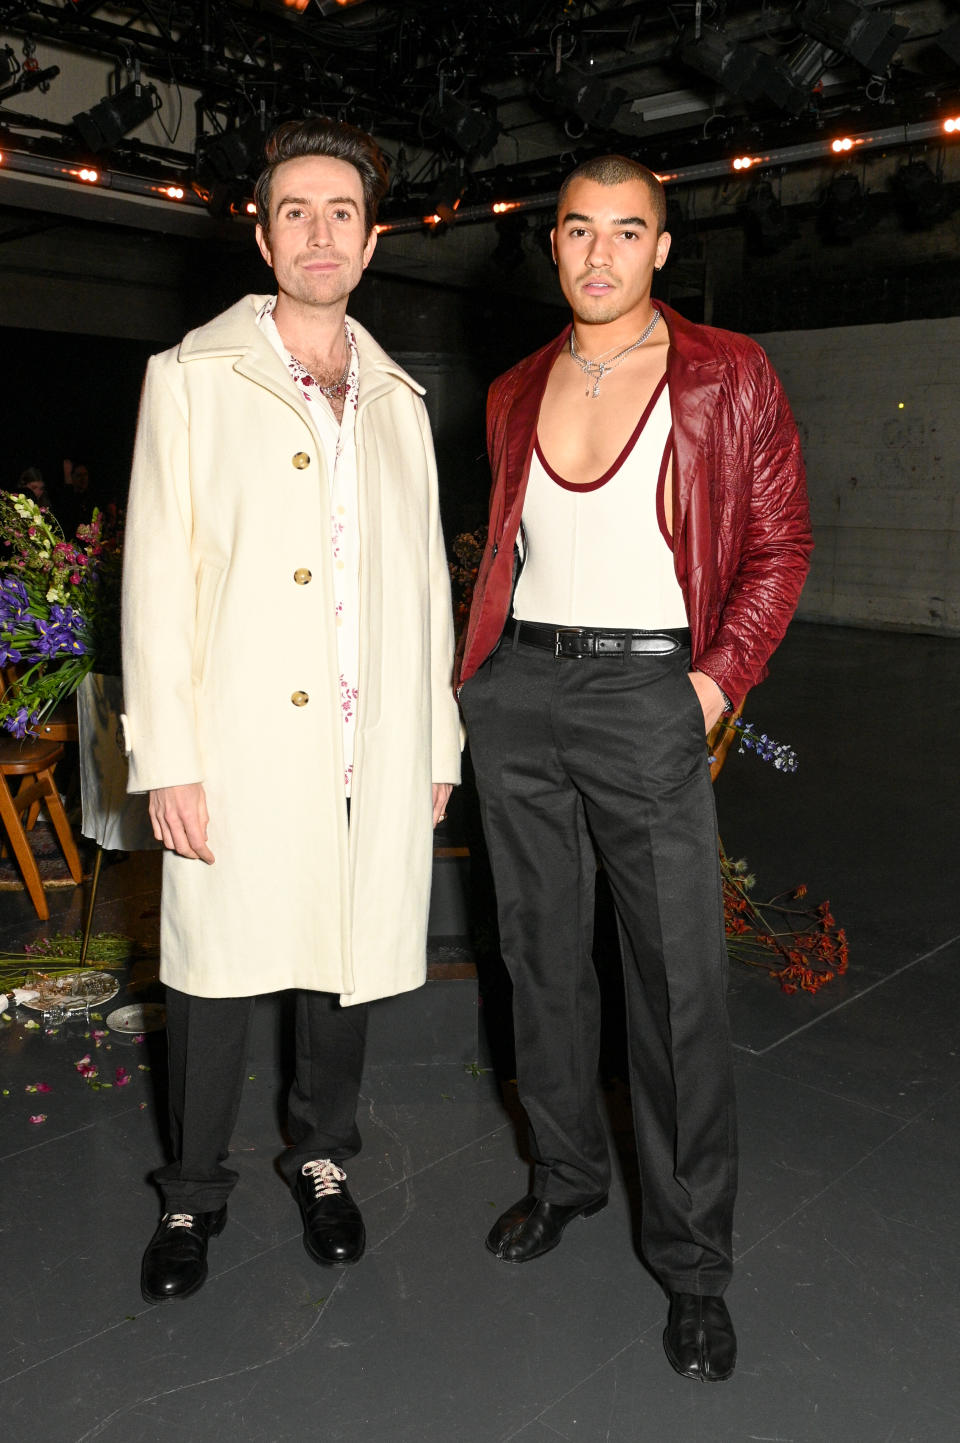 Nick Grimshaw and Meshach Henry attend the S.S. Daley show during London Fashion Week February 2022 at BFC NEWGEN Show Space on February 18, 2022 in London, England.  (Getty Images)